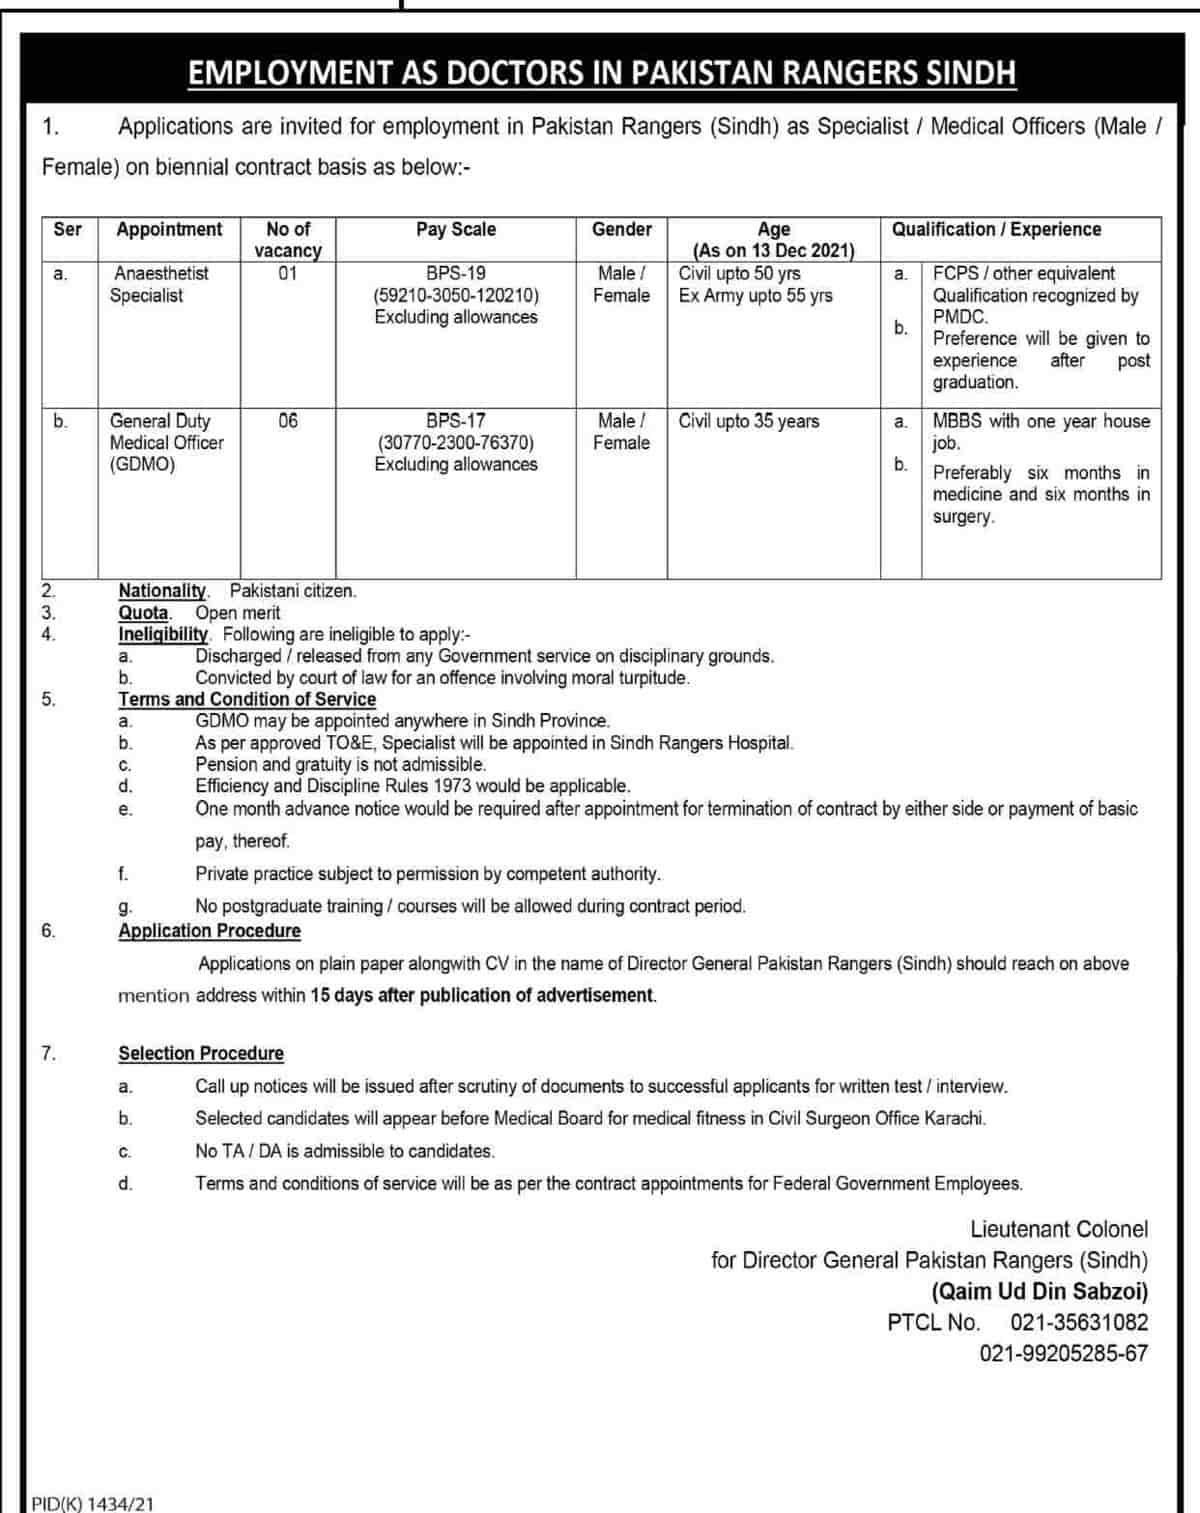 Pakistan Rangers Sindh Jobs 2021 Specialist / Medical Officers Latest